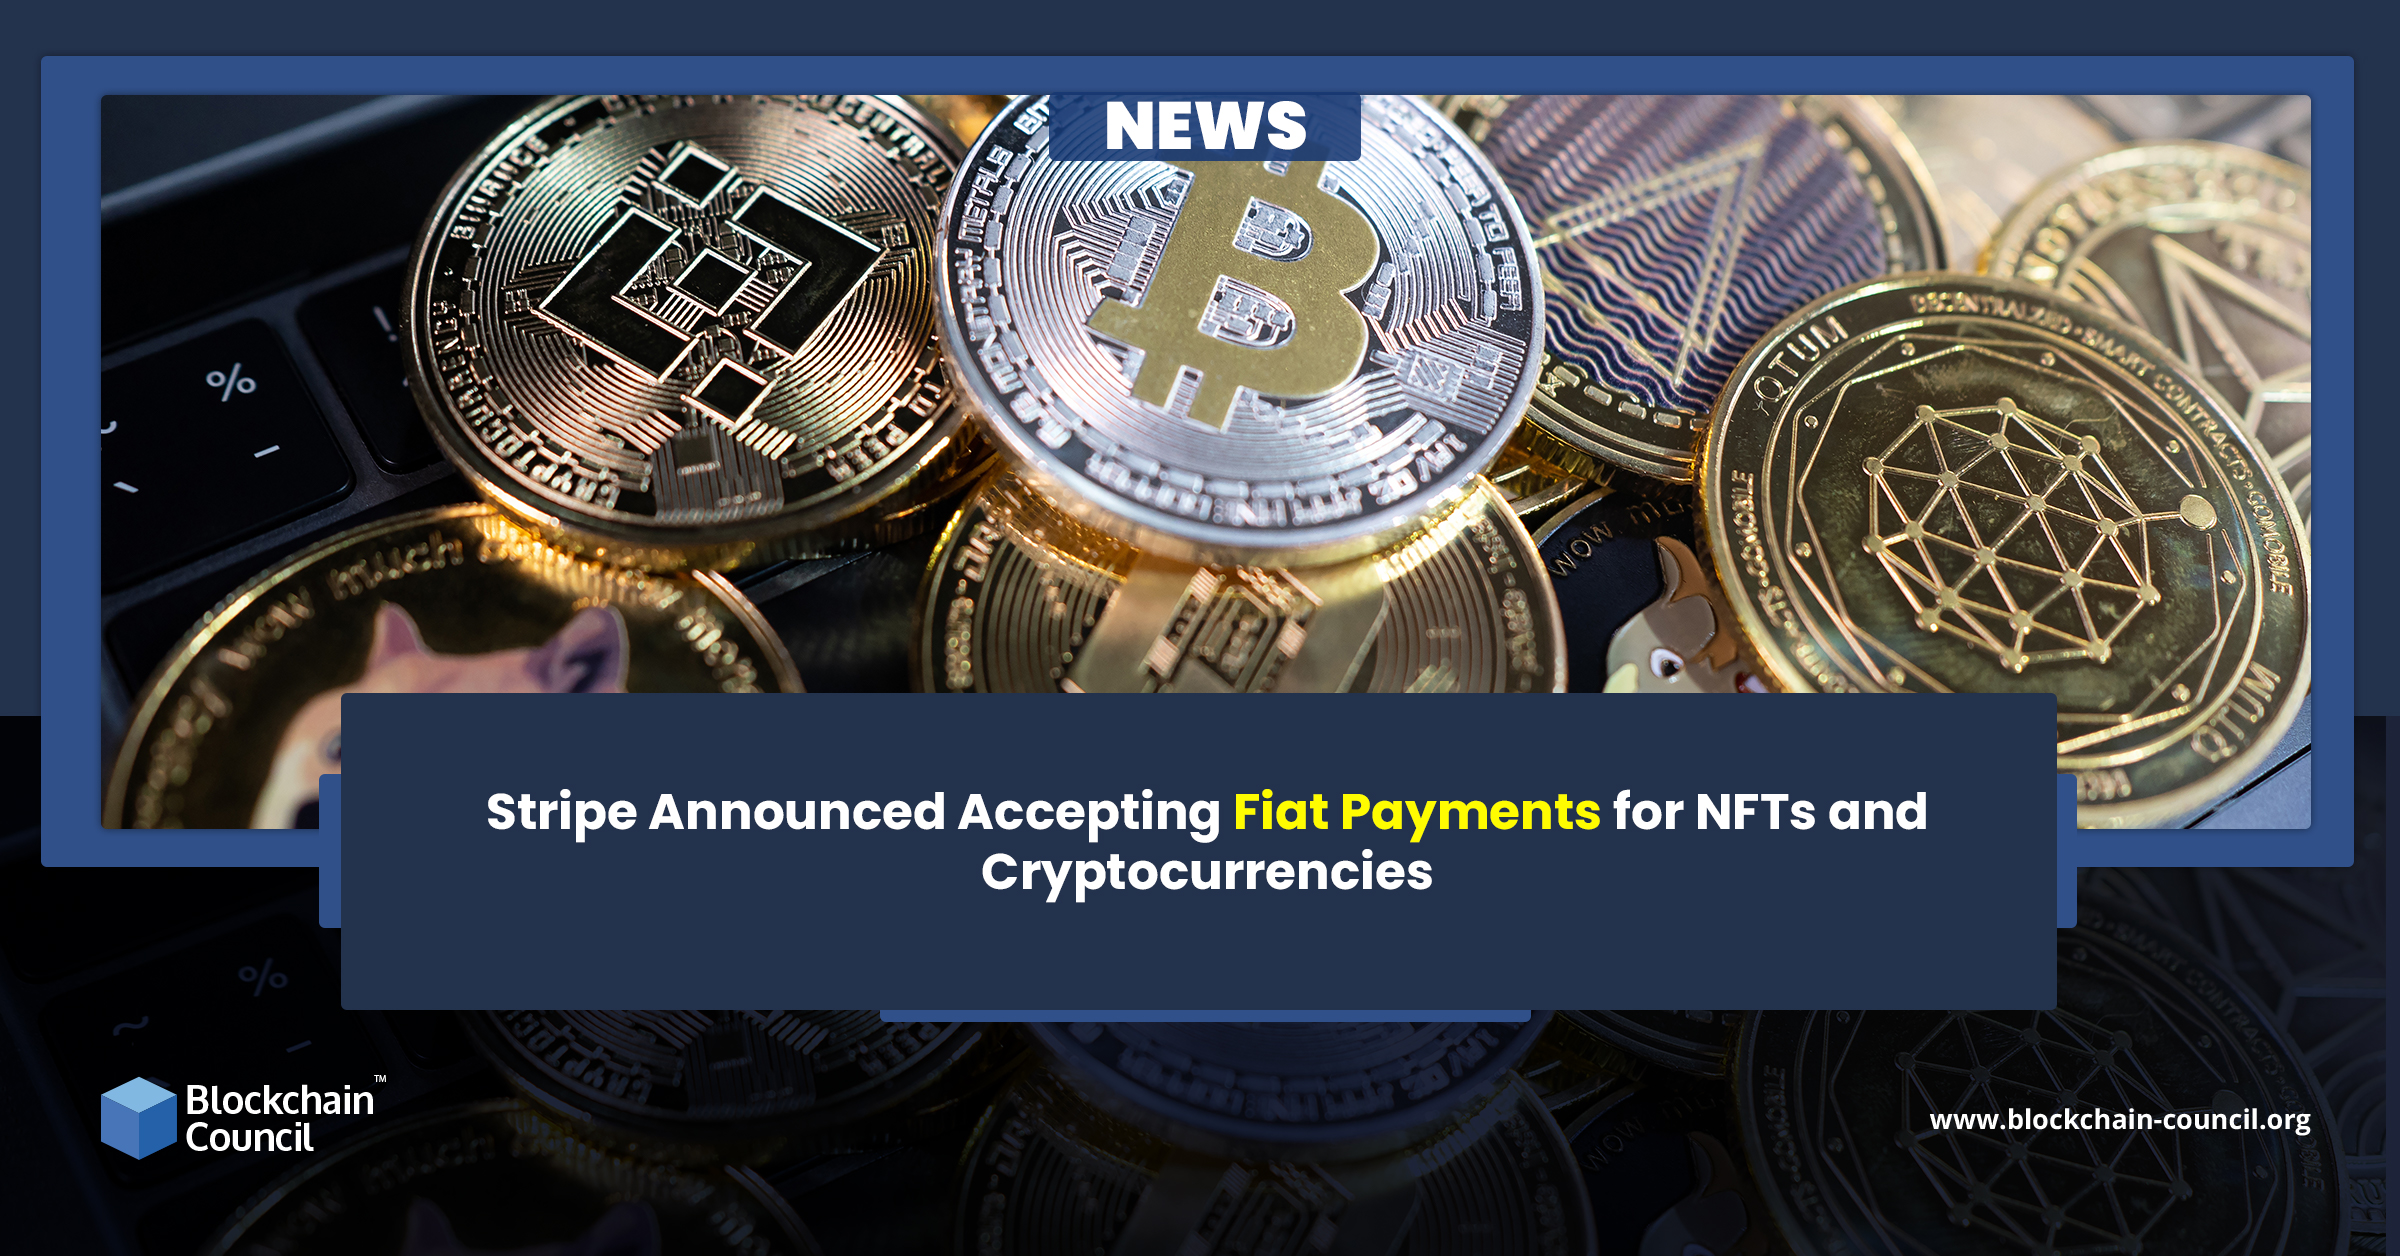 Stripe Announced Accepting Fiat Payments for NFTs and Cryptocurrencies